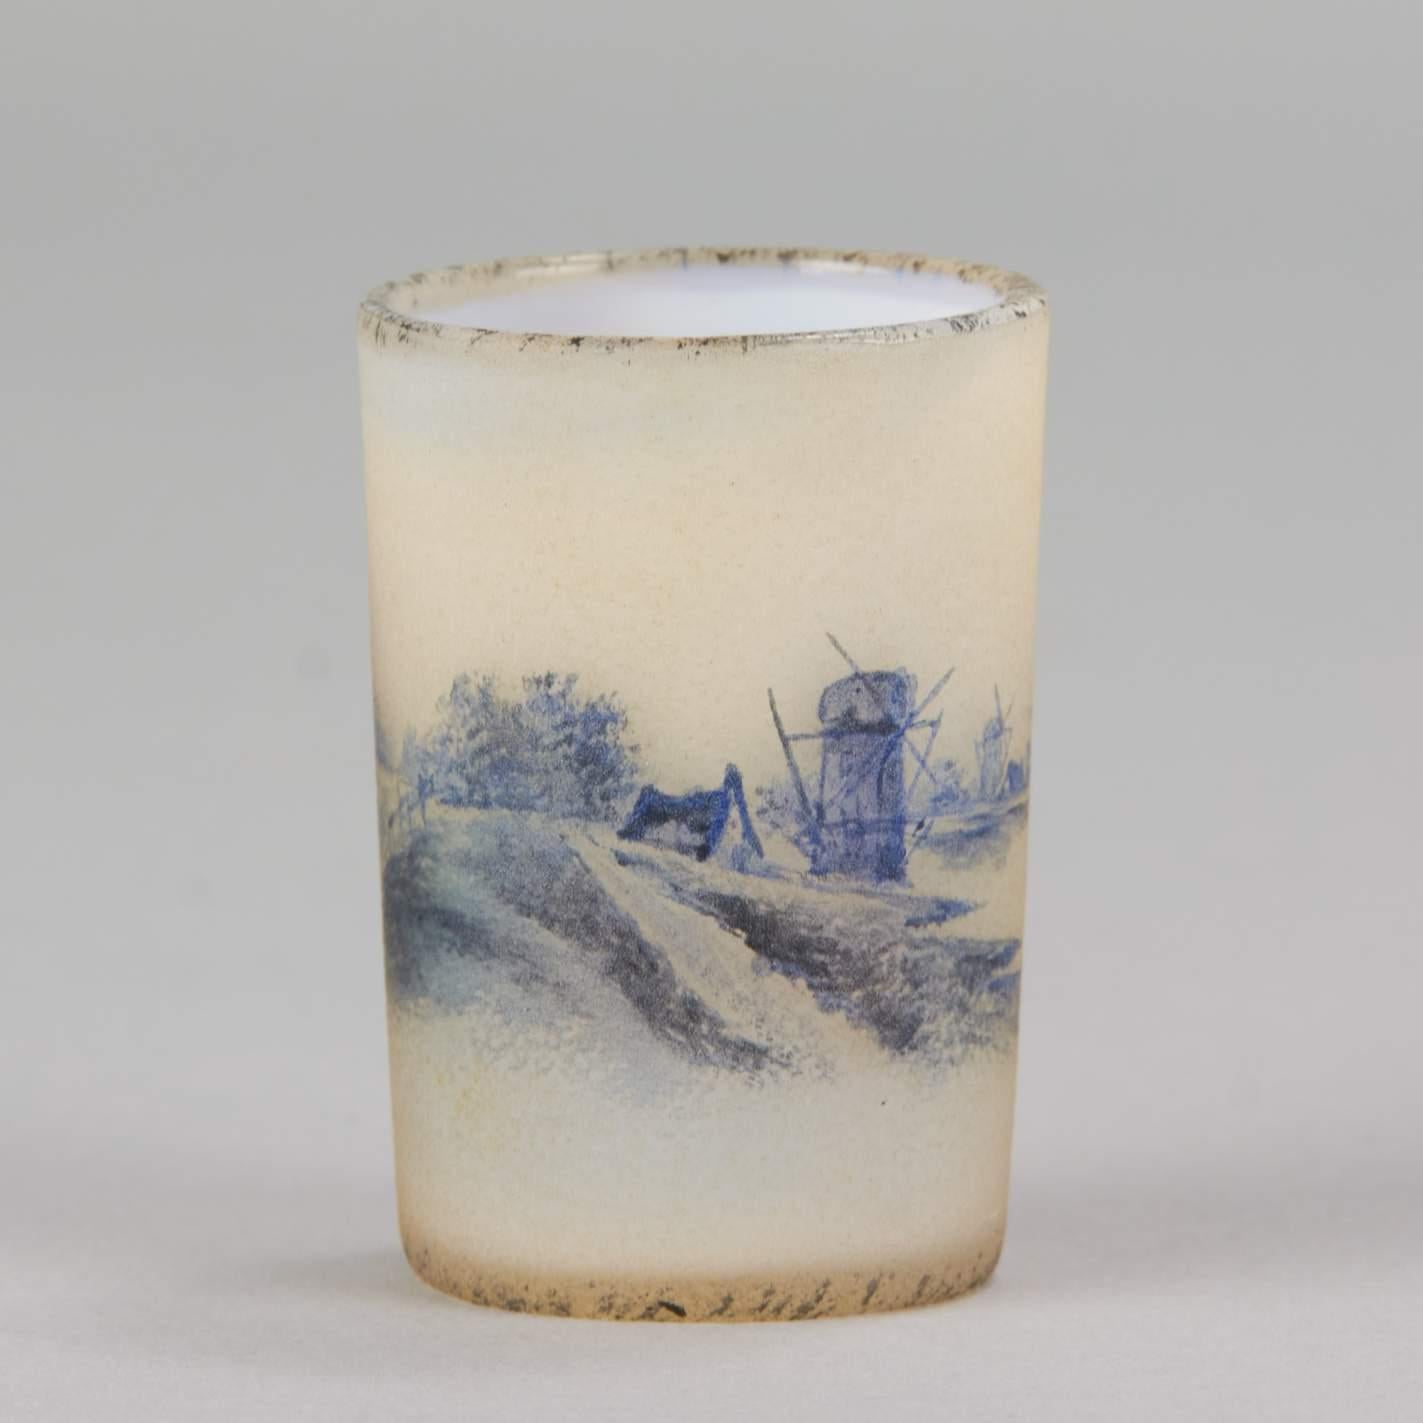 An attractive miniature cameo glass vase decorated with boats upon a lake in a snowy Dutch landscape with a windmill on the banks, the surface exhibiting Fine colour and hand painted detail. Signed Daum Nancy and with the Cross of Lorraine


Daum